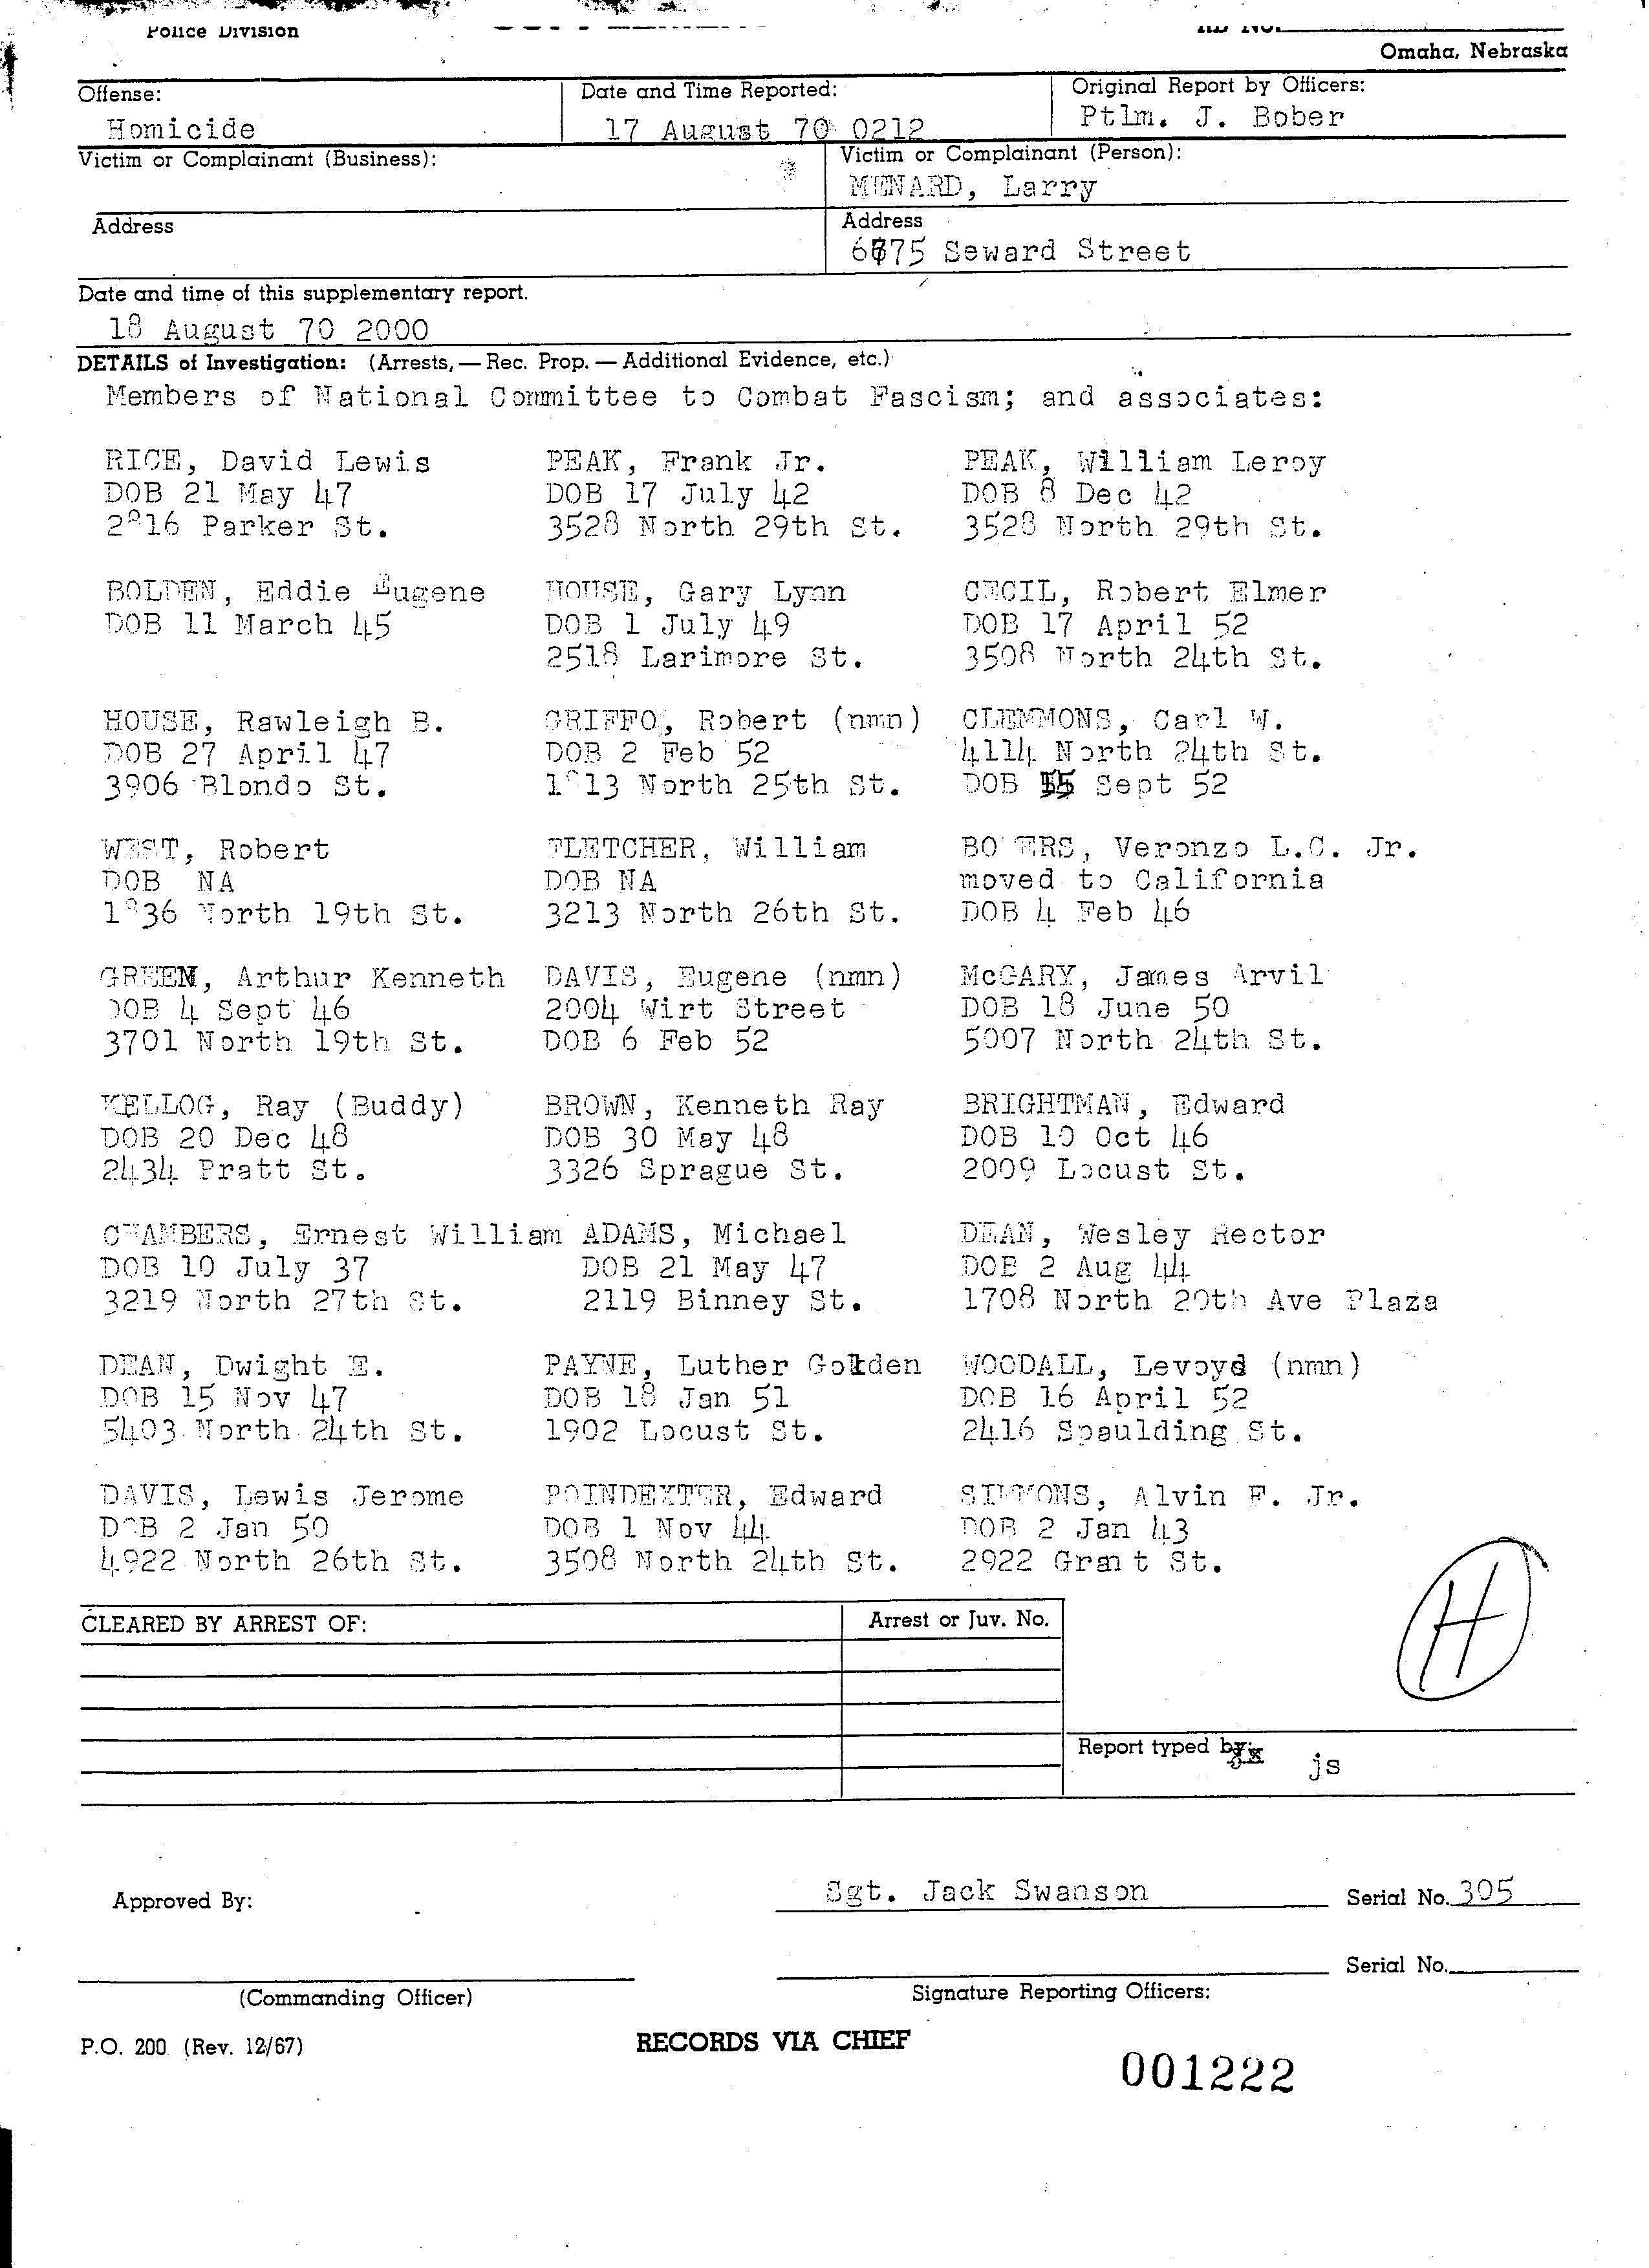 List of suspects in August 17 1970 North Omaha homicide by Omaha Police Department detective Jack Swanson